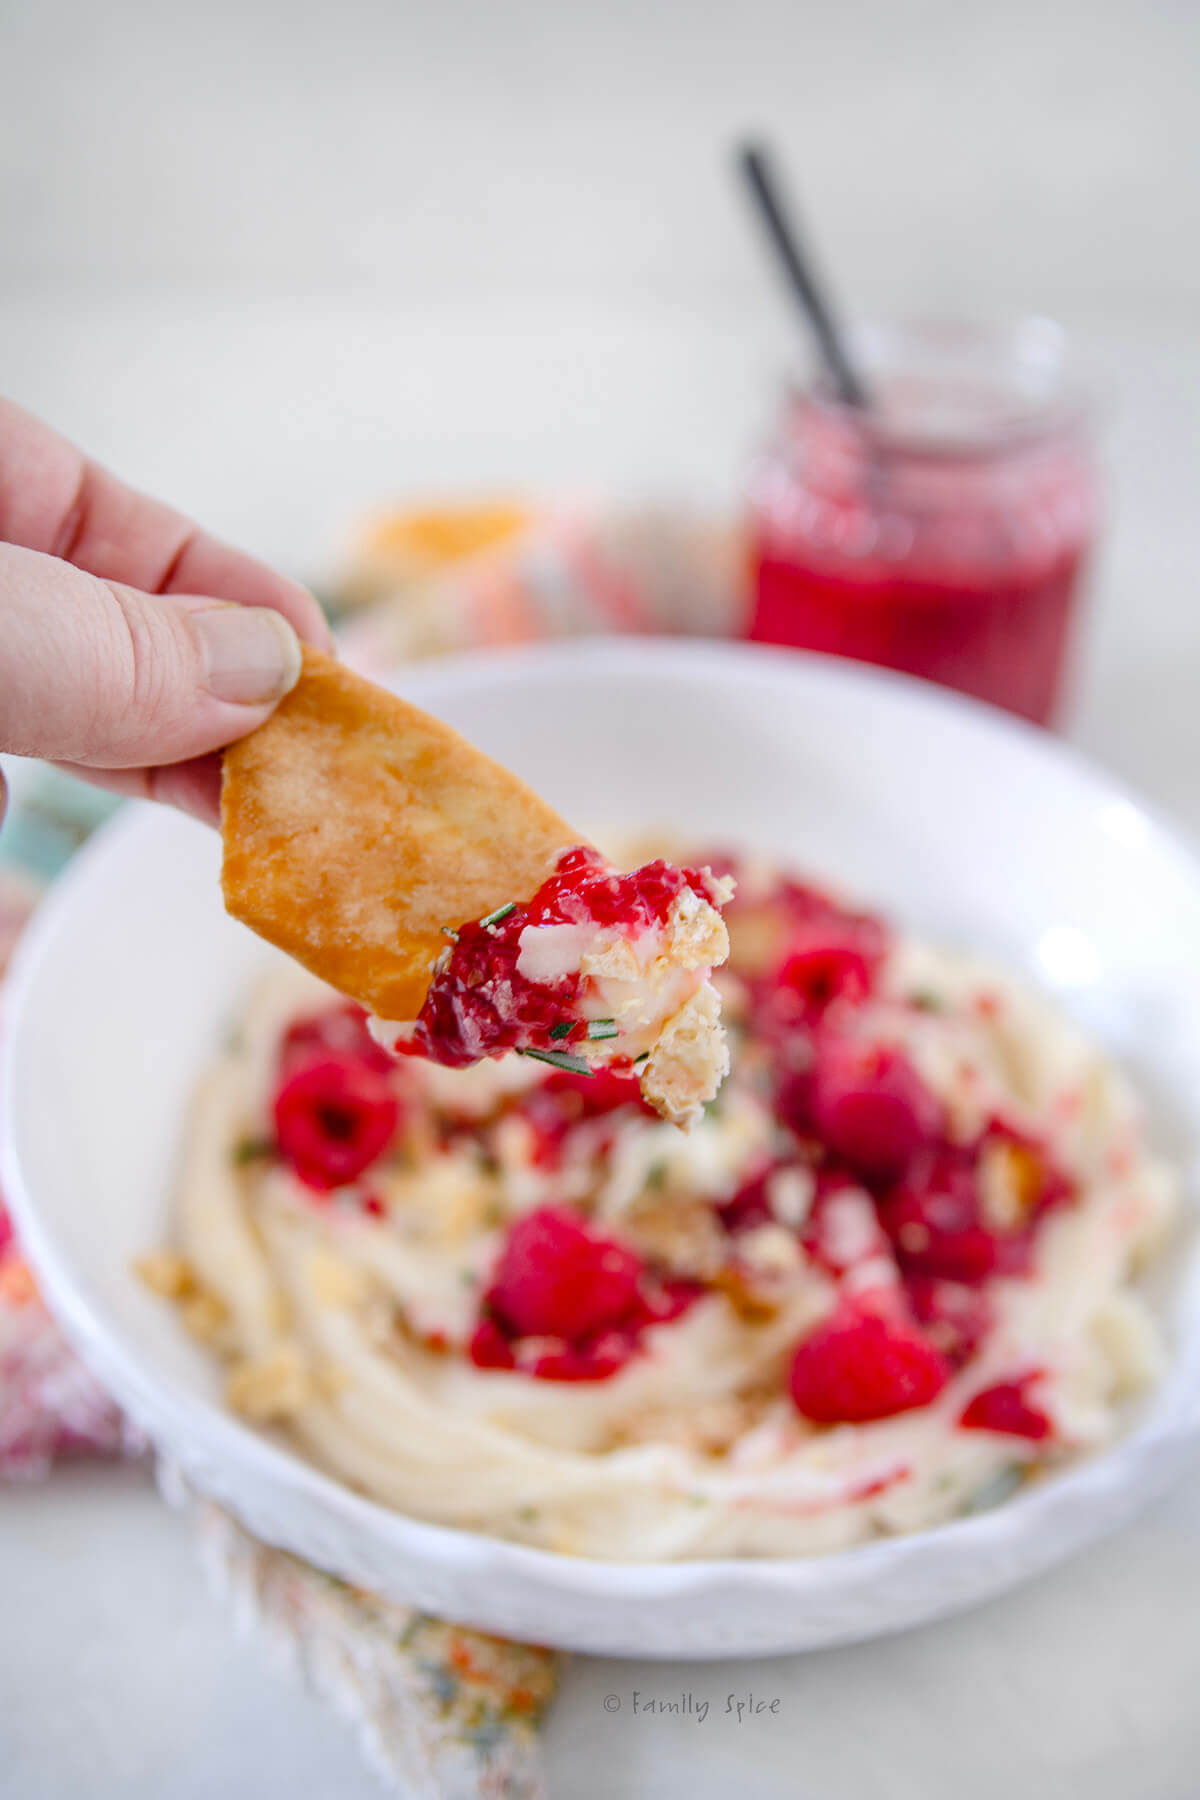 Side view of a hand holding a pita whip with whipped brie on it with a white bowl with whipped brie and raspberry compote behind it